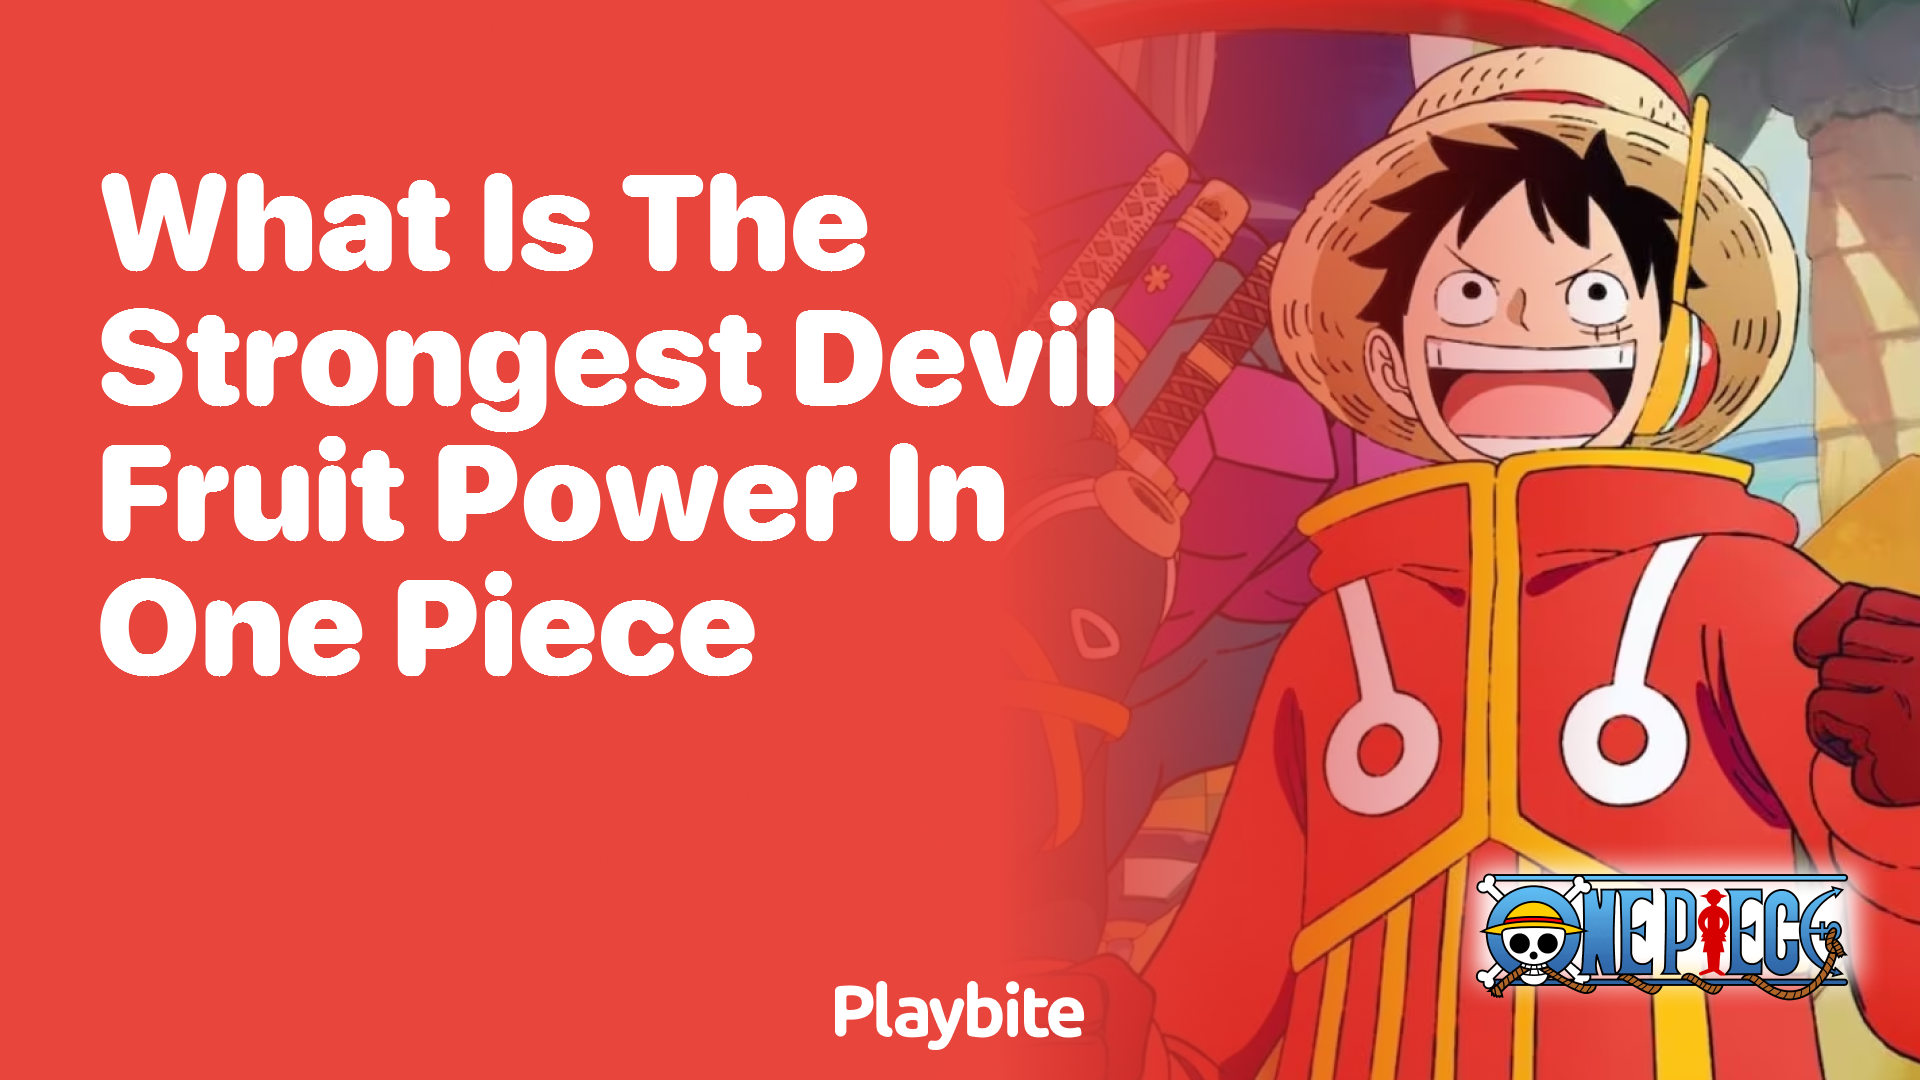 What is the Strongest Devil Fruit Power in One Piece?